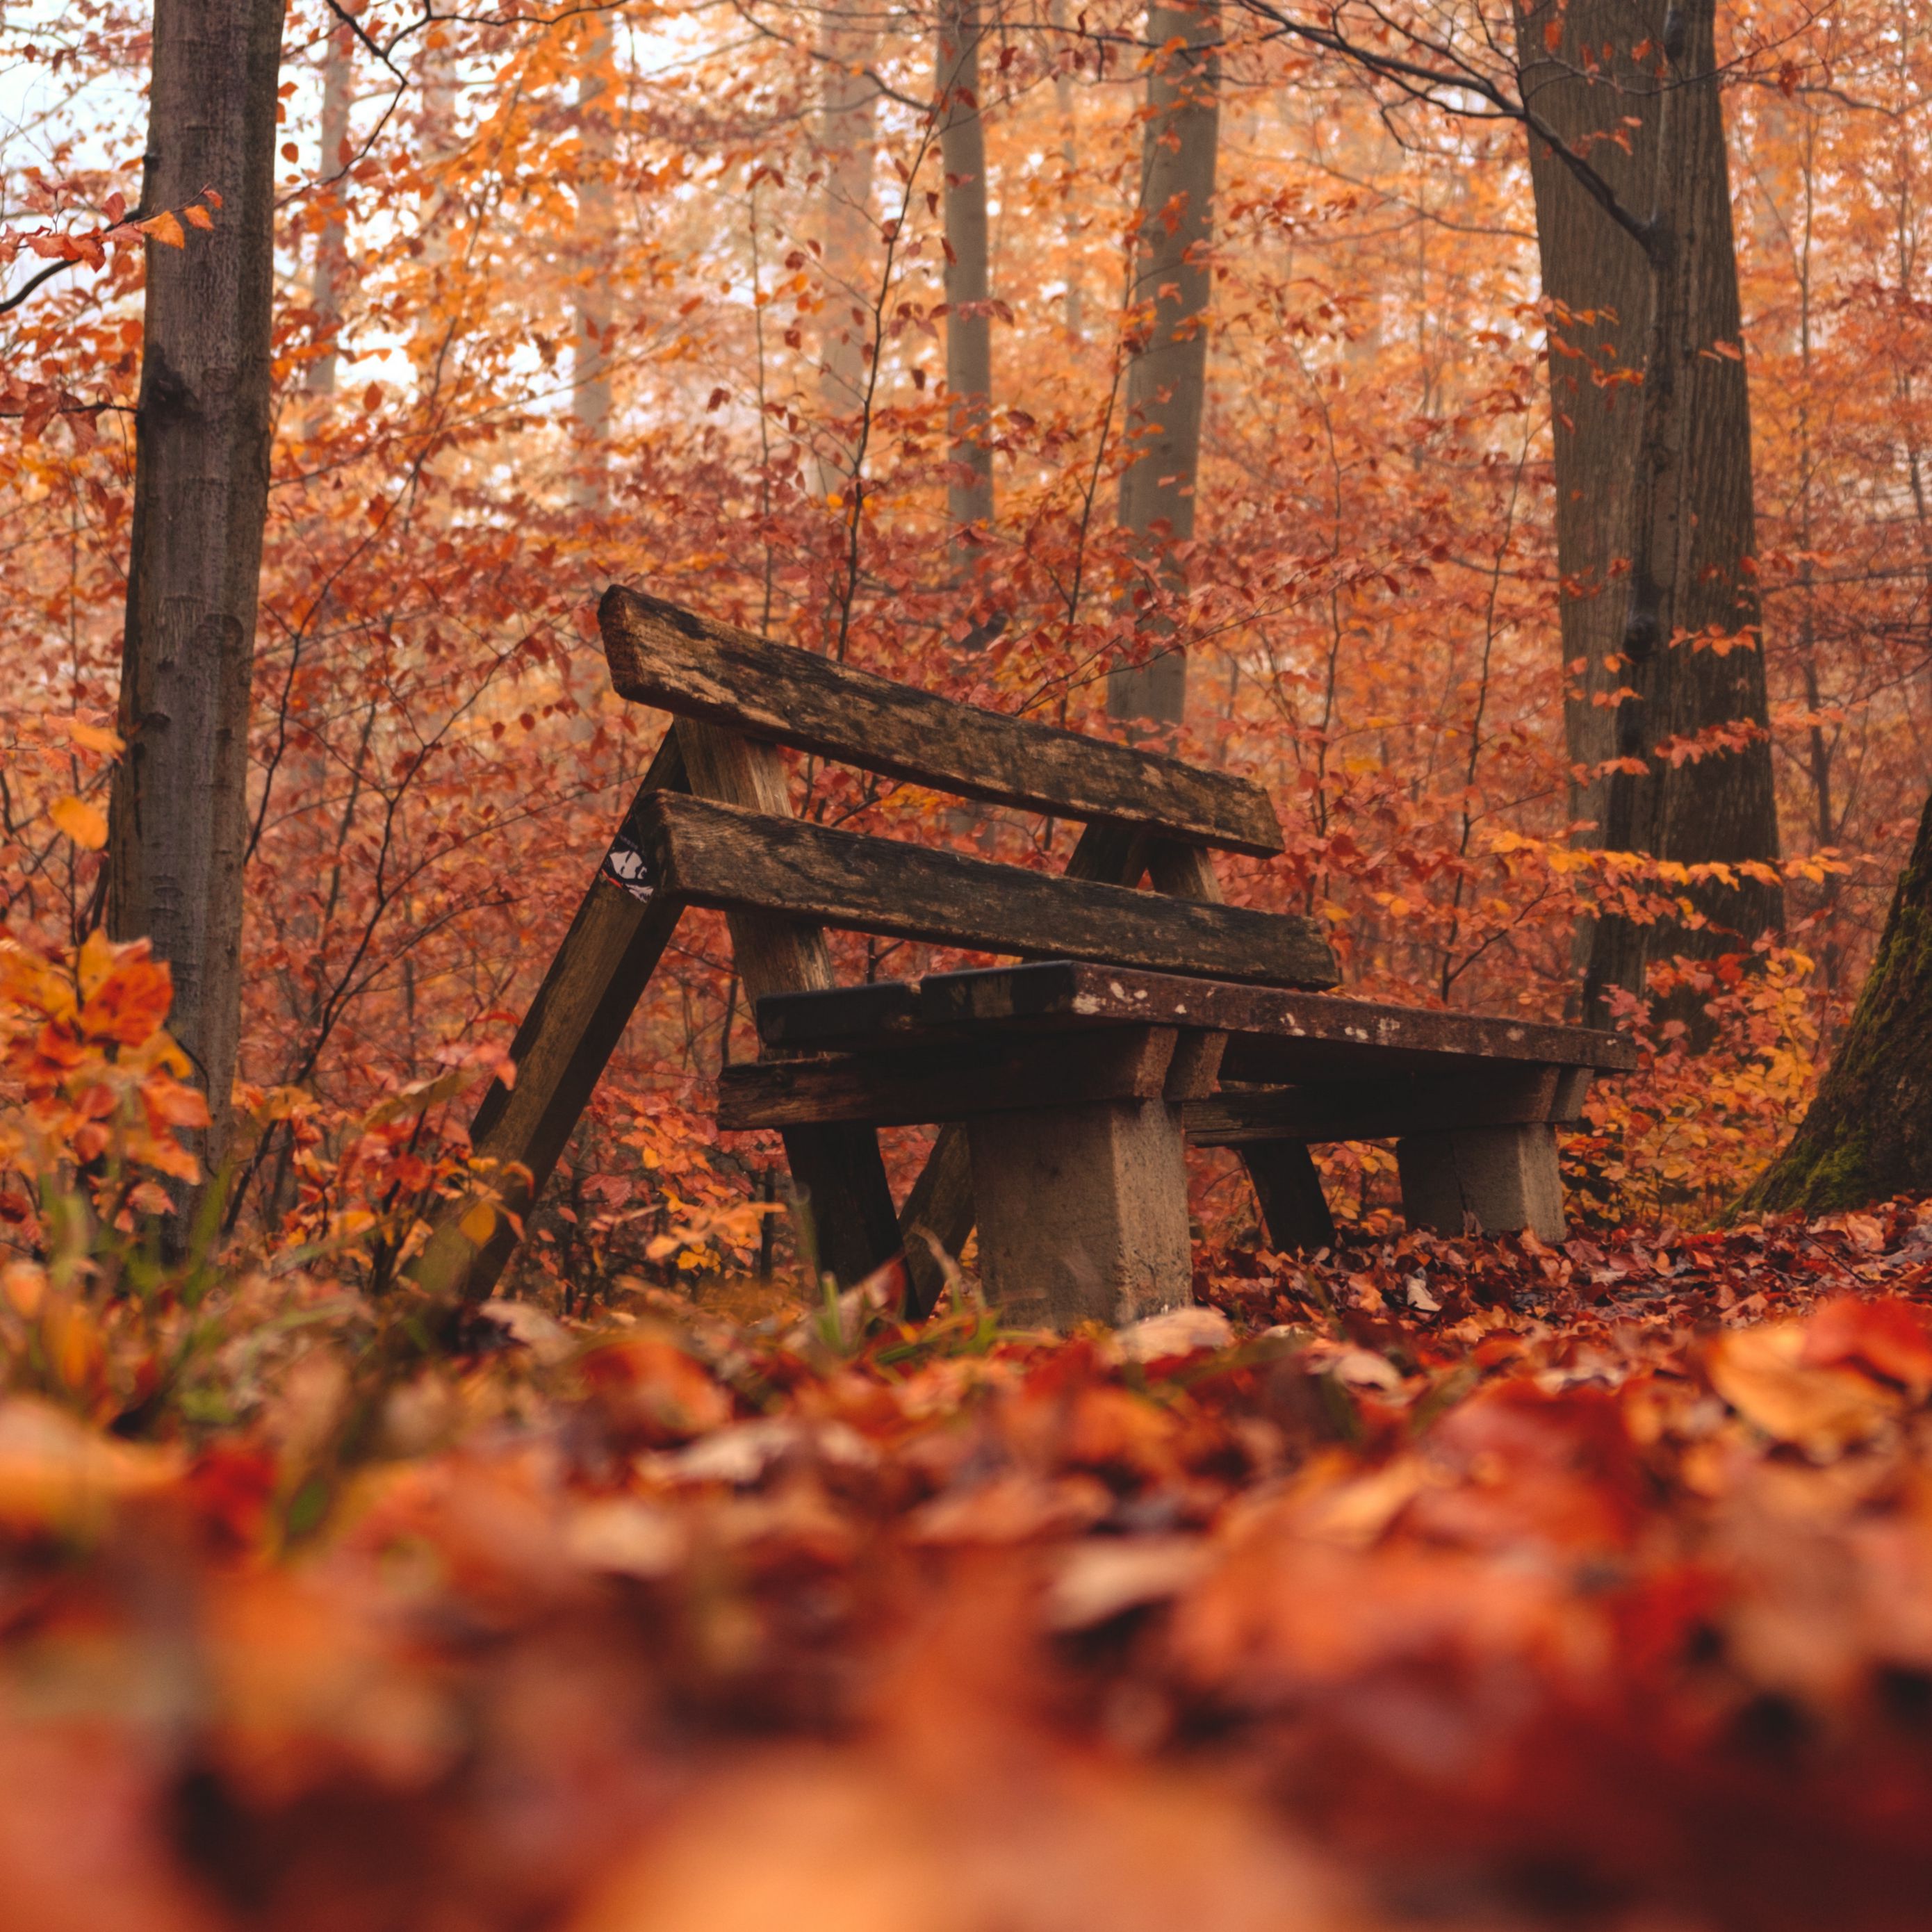 Download Wallpaper 2780x2780 Bench Forest Autumn Nature Ipad Air